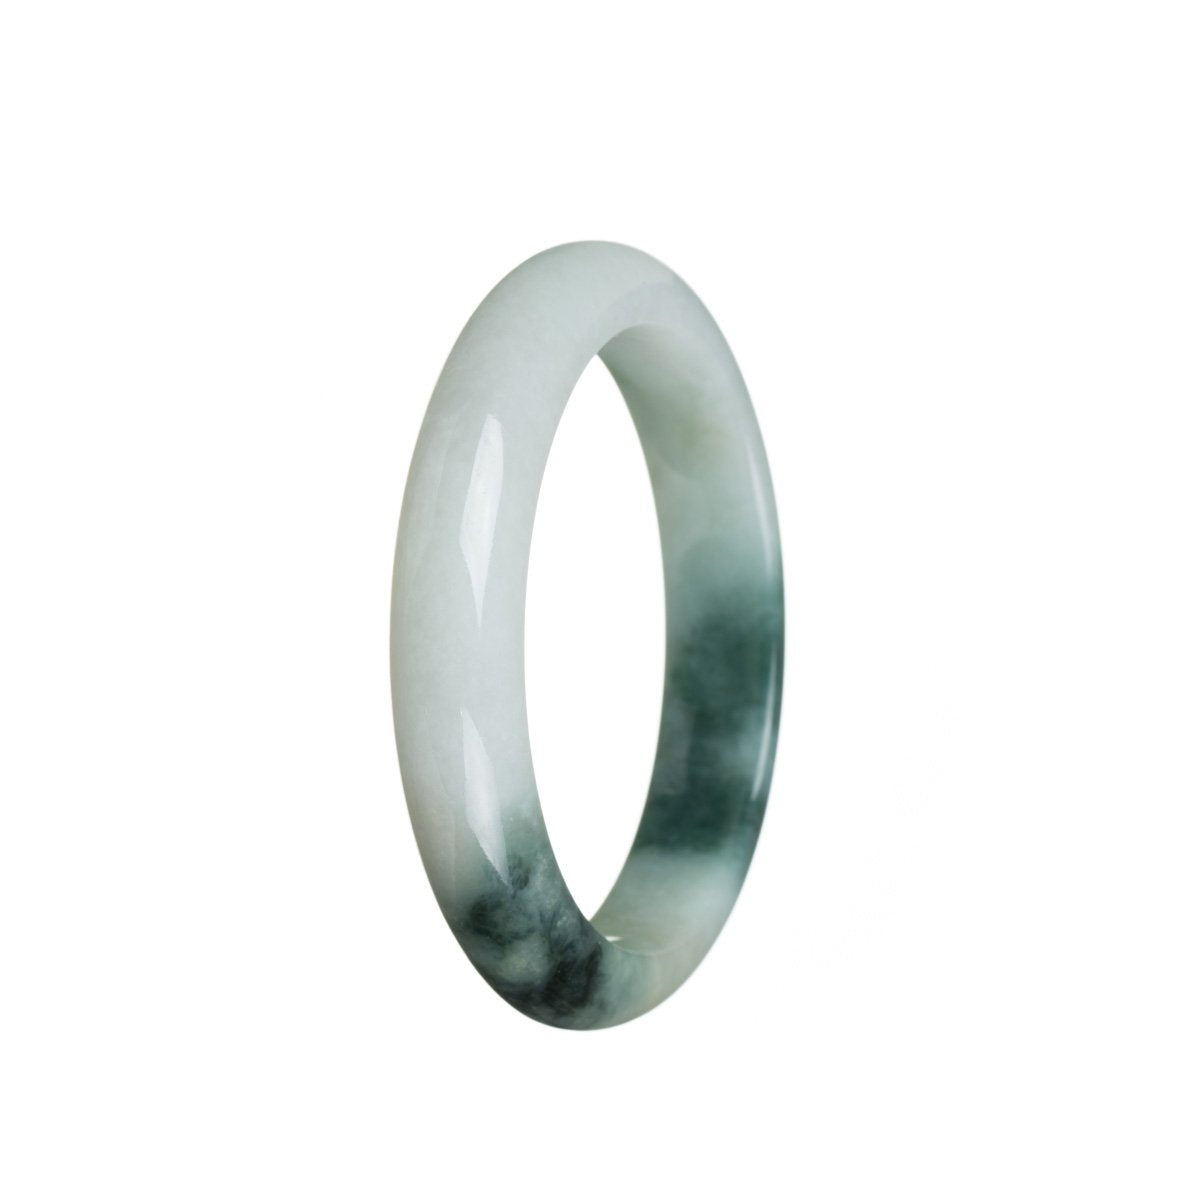 A close-up photo of a traditional jade bracelet with a white and green flower design. The bracelet is made of high-quality Grade A jade and has a semi-round shape, measuring 55mm in diameter. The brand name "MAYS" is also mentioned.